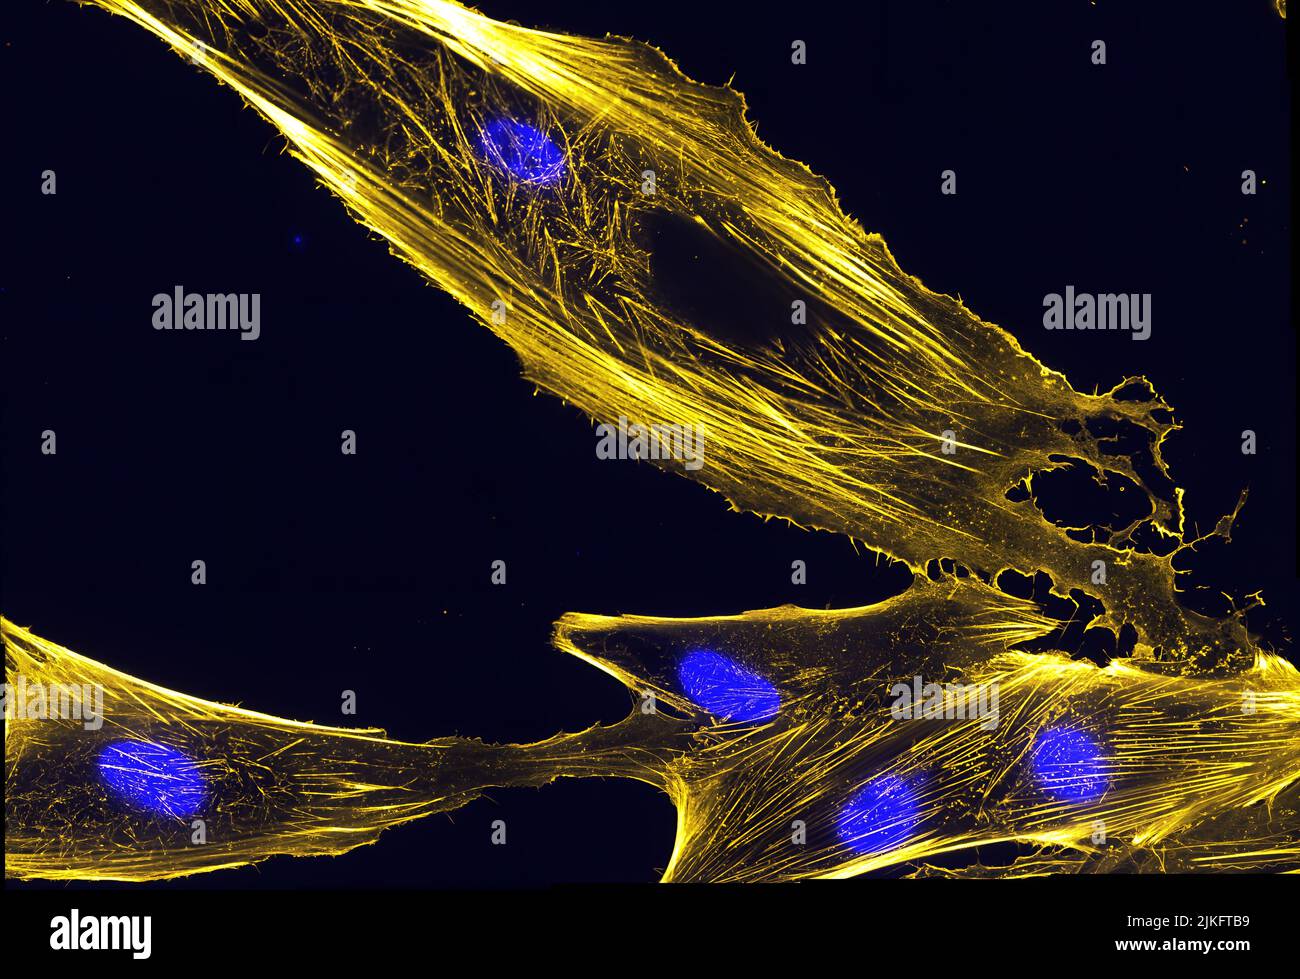 Immunofluorescence image of actin bundles in muscle precursor cells called myoblasts. Actin is labeled with fluorescently labeled phalloidin, which is a toxin from the fungus Amanita phalloides. Nuclei are shown in blue. Stock Photo